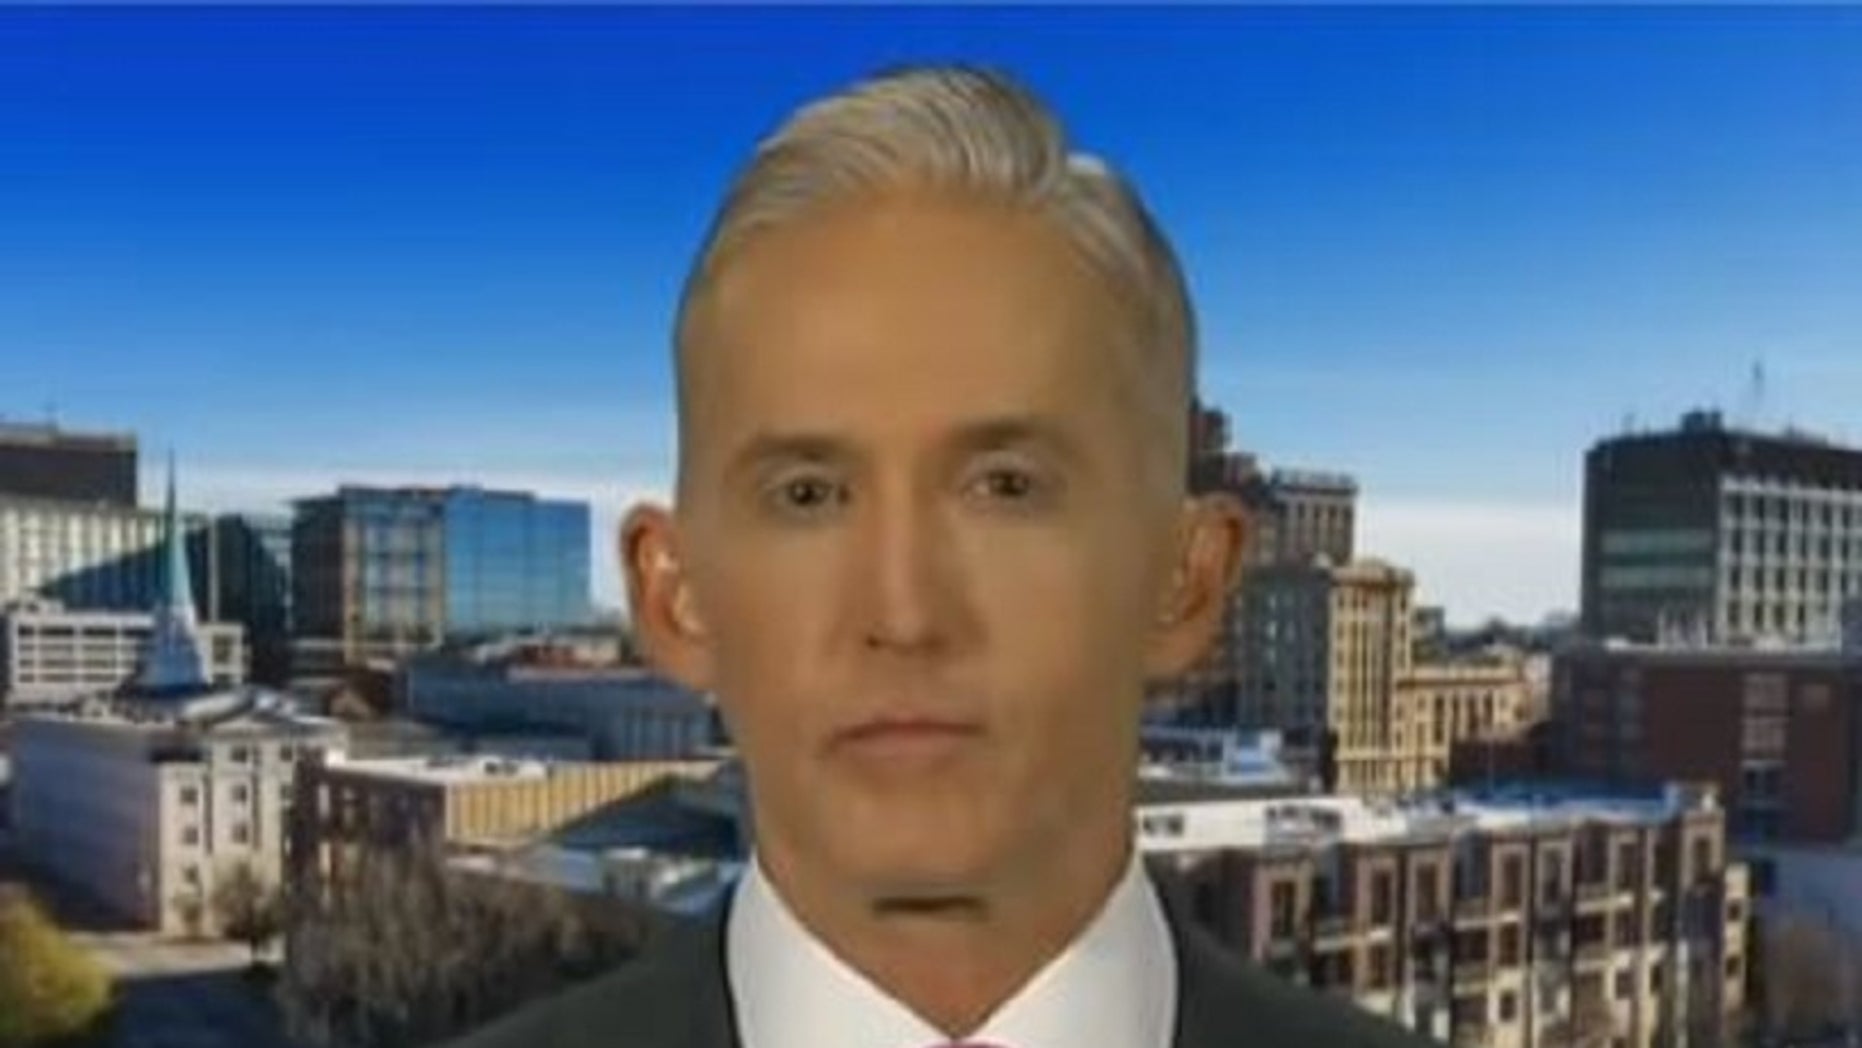 Trey Gowdy fires back after Warren claims he left Congress for 